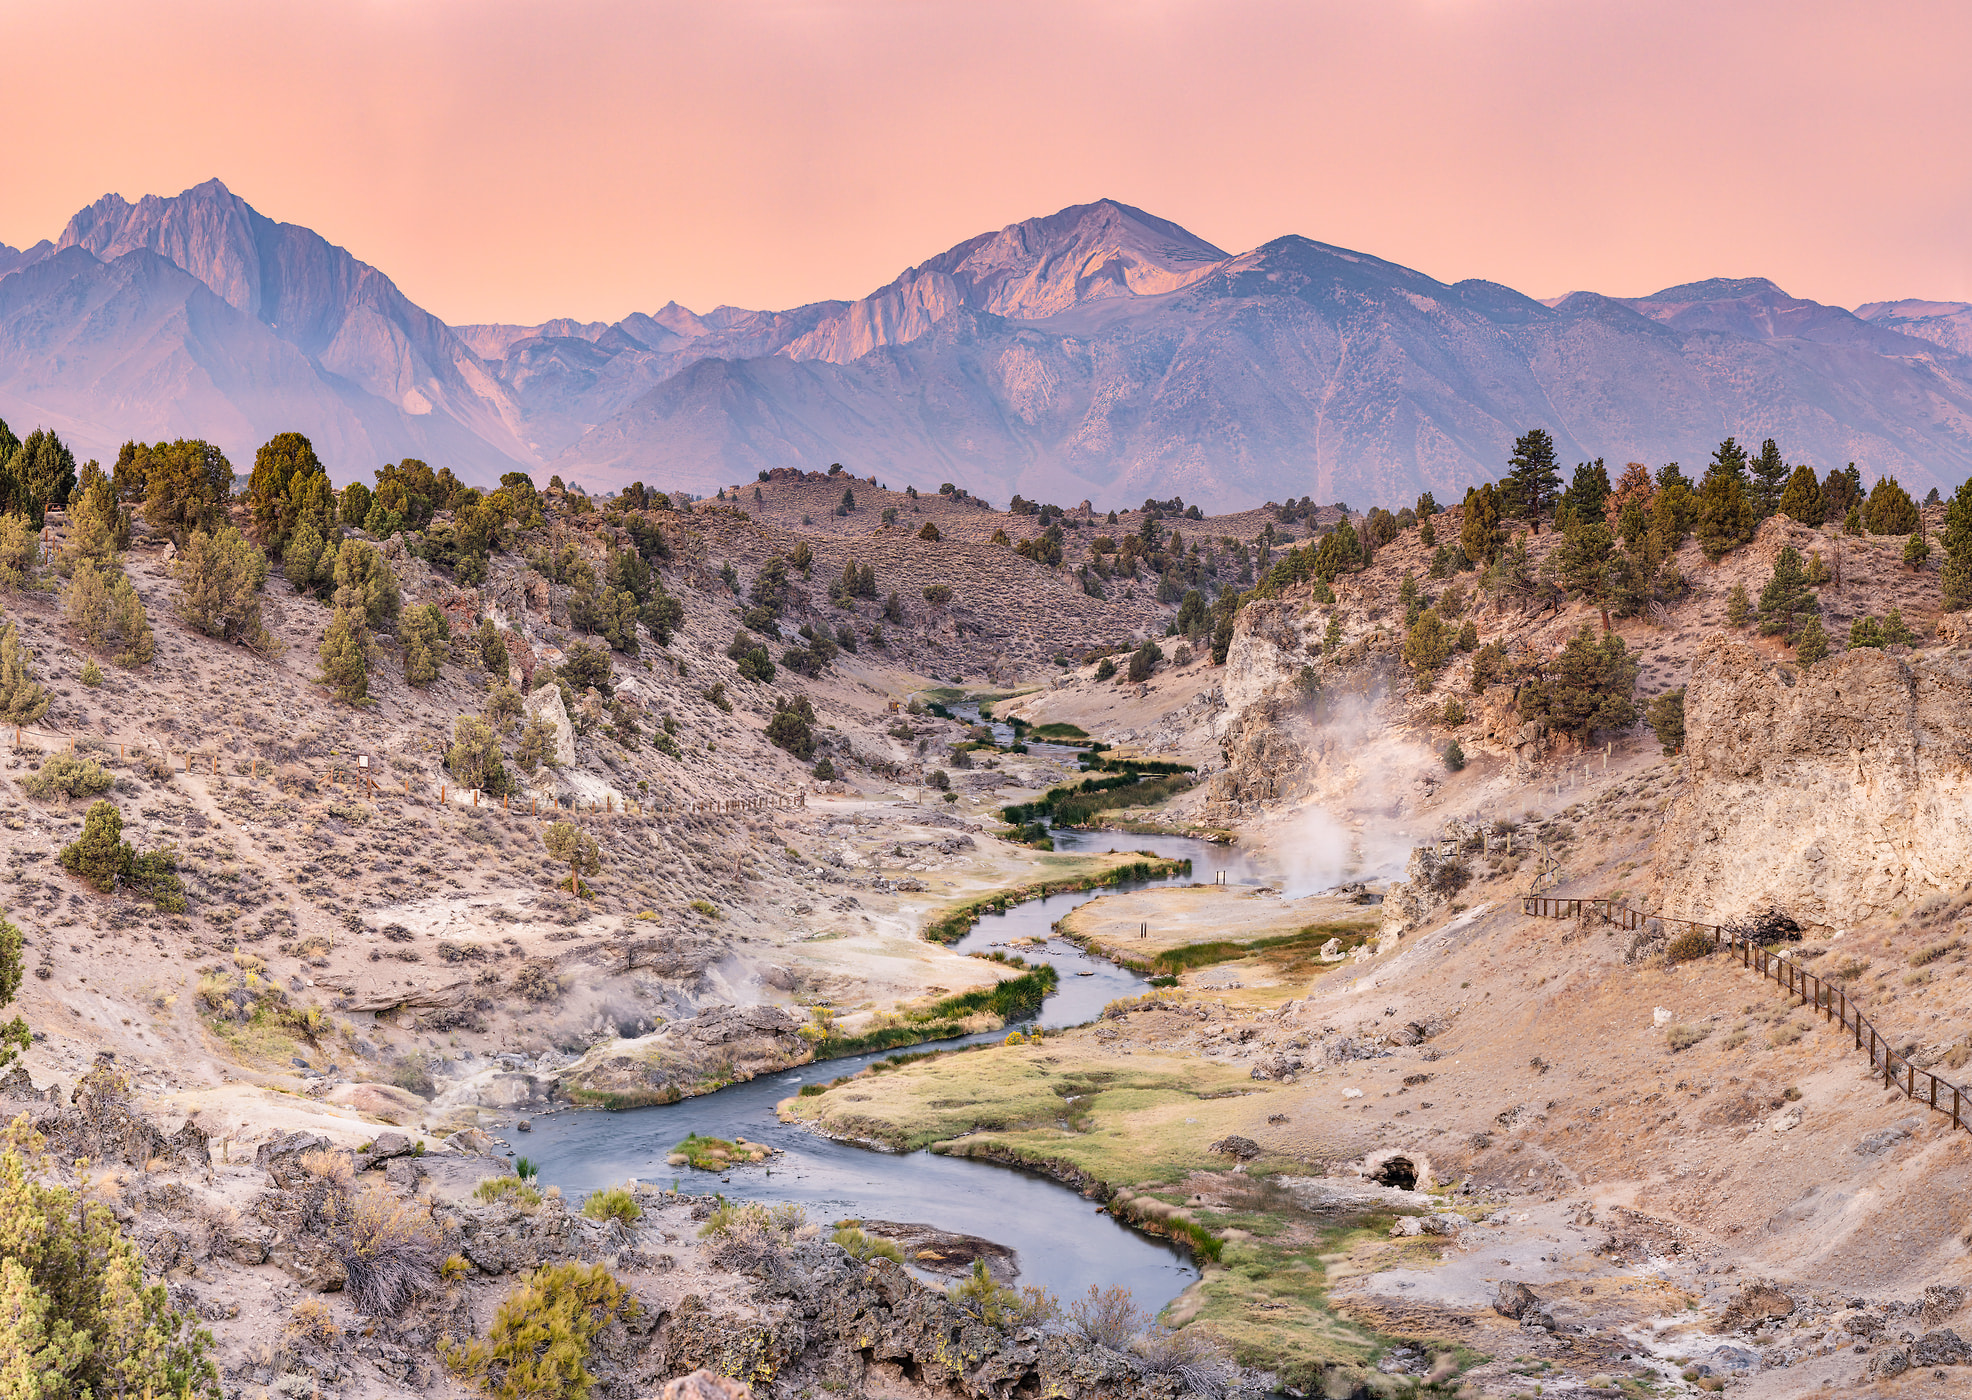 439 megapixels! A very high resolution, large-format VAST photo print of a pastel-colored landscape; photograph created by Chris Blake in Mammoth Lakes, California.